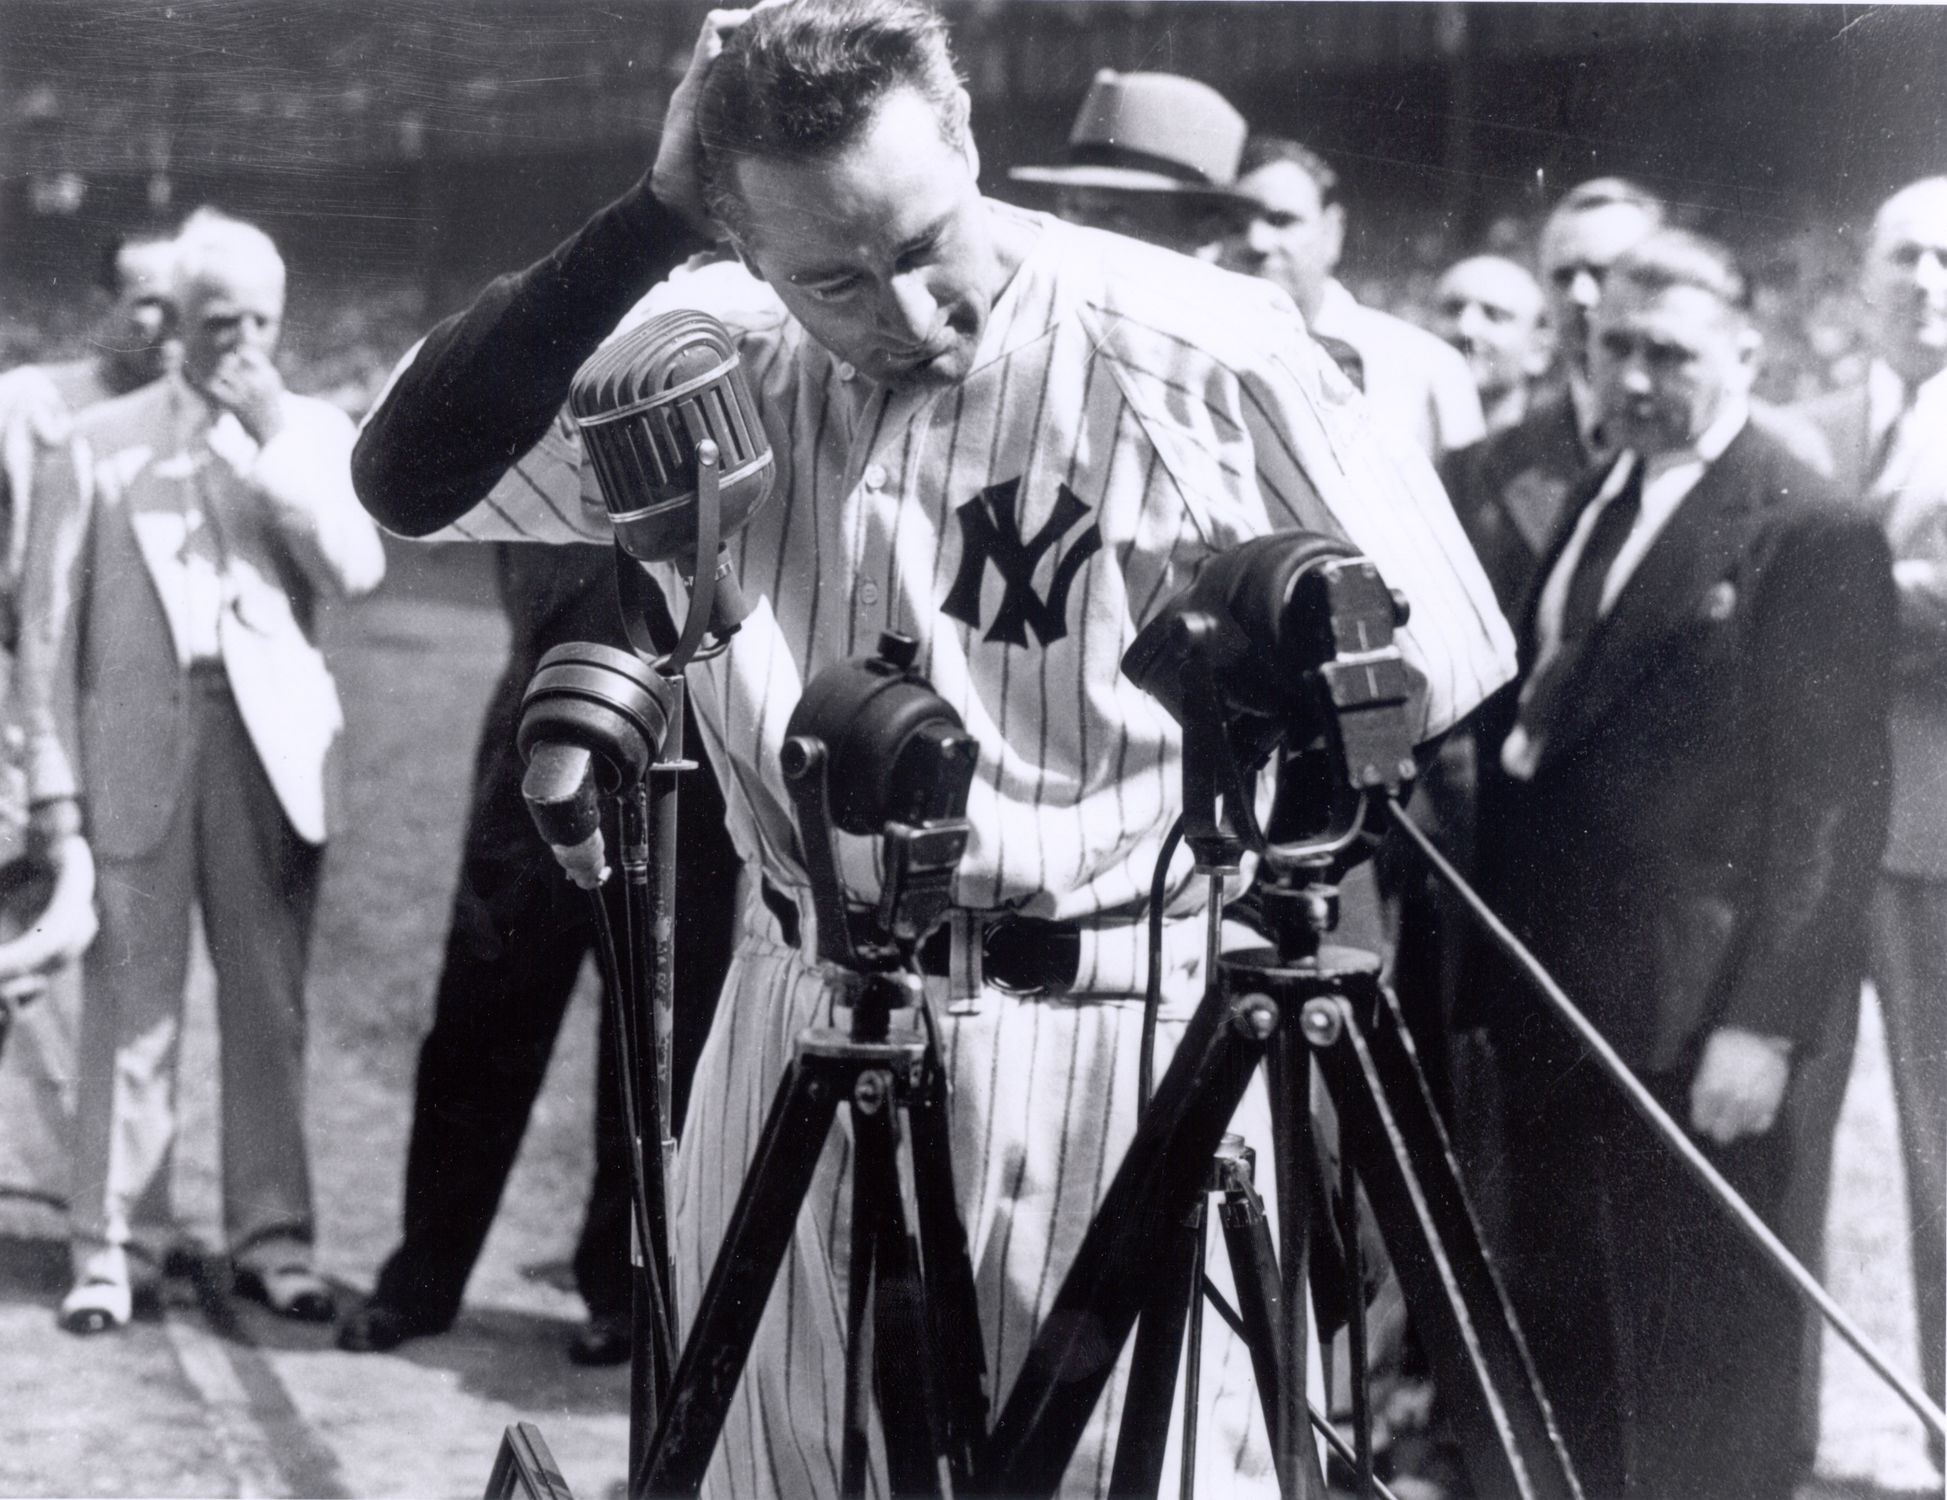 July 4, 1939: Lou Gehrig says farewell to baseball with 'Luckiest